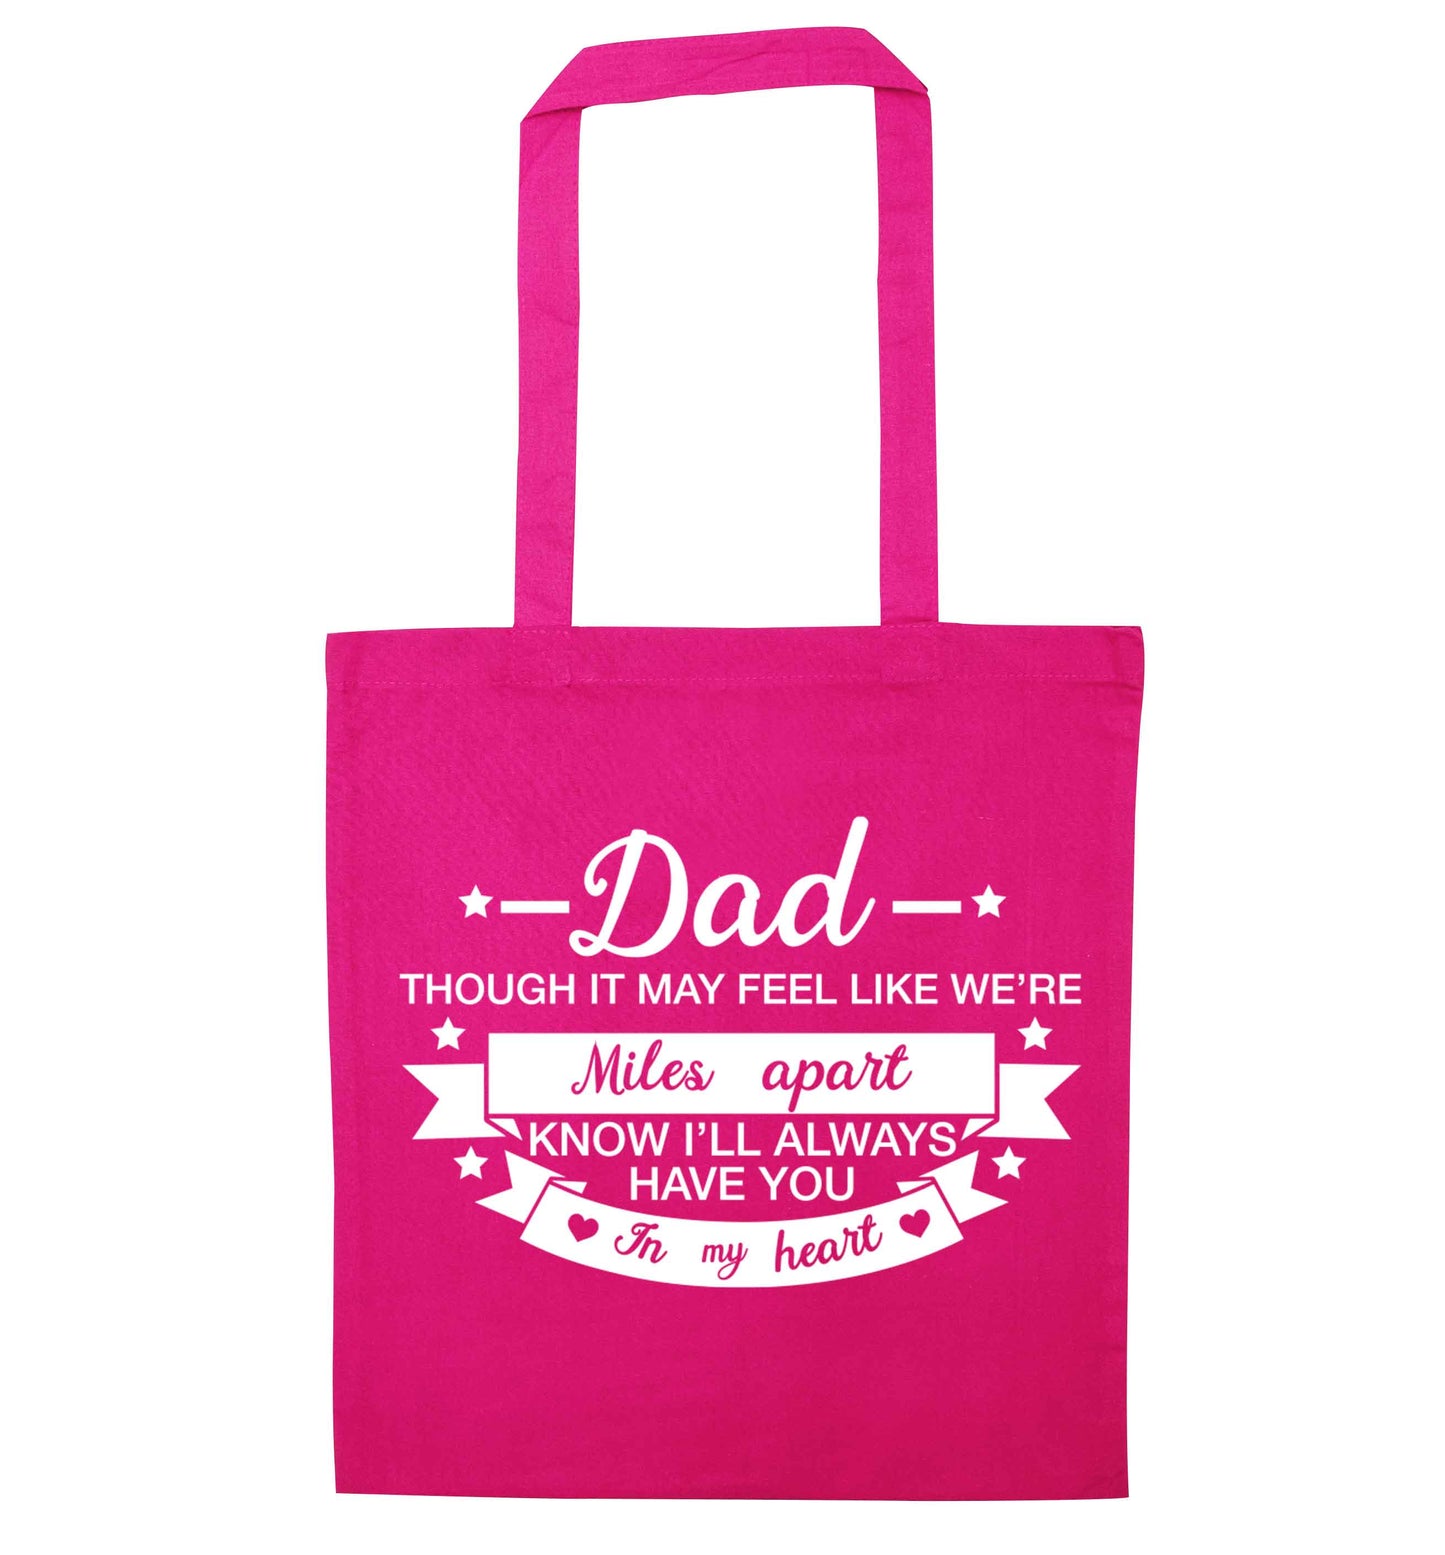 Dad though it may feel like we're miles apart know I'll always have you in my heart pink tote bag